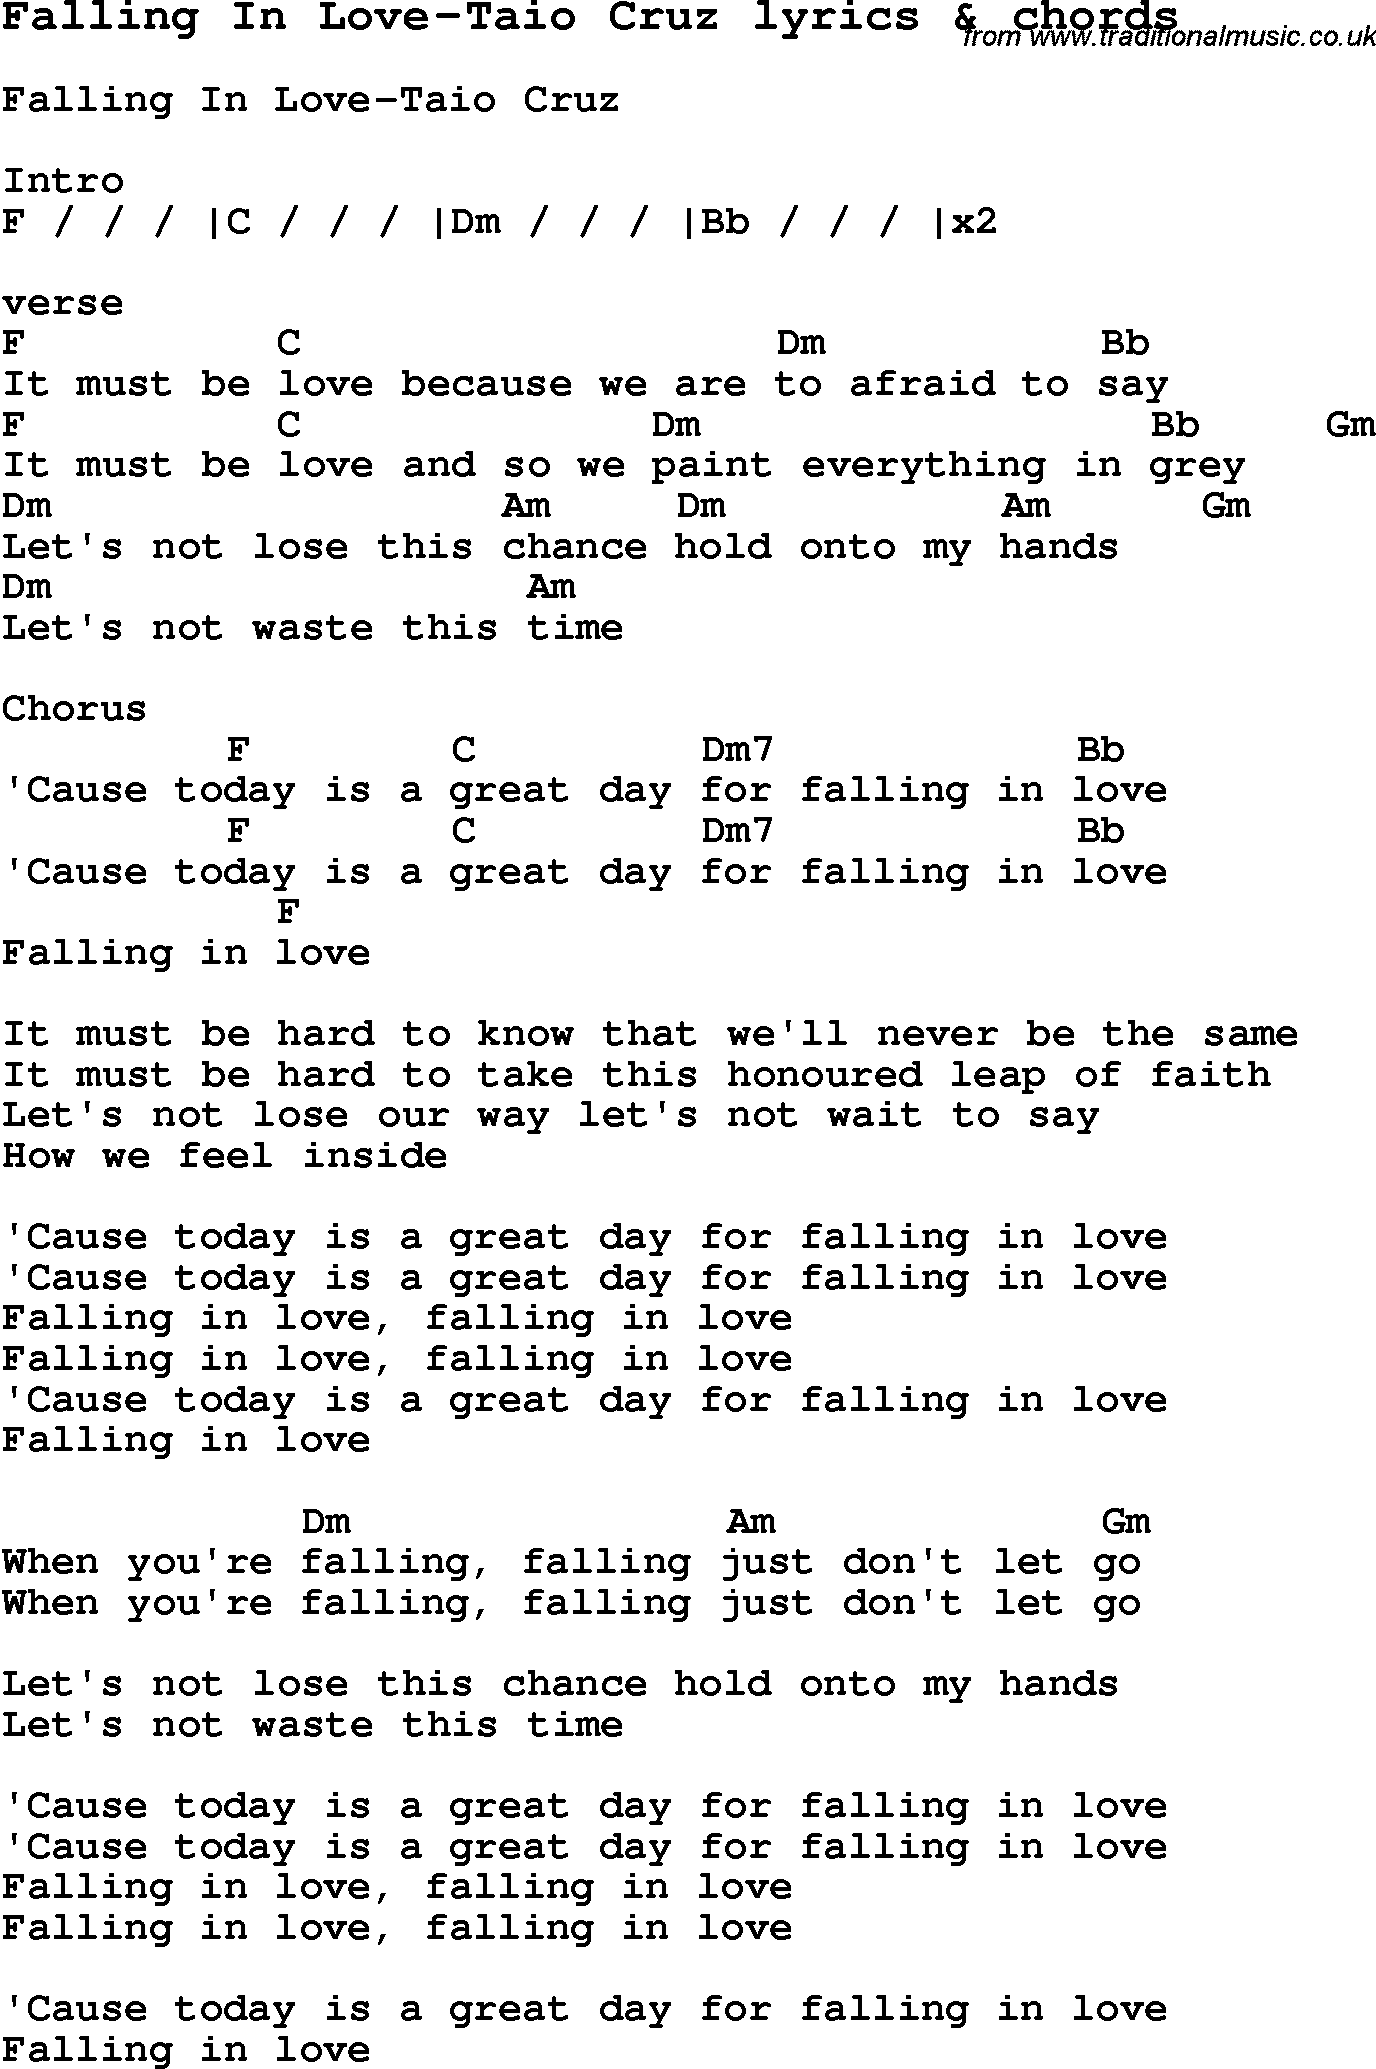 Love Song Lyrics for: Falling In Love-Taio Cruz with chords for Ukulele, Guitar Banjo etc.